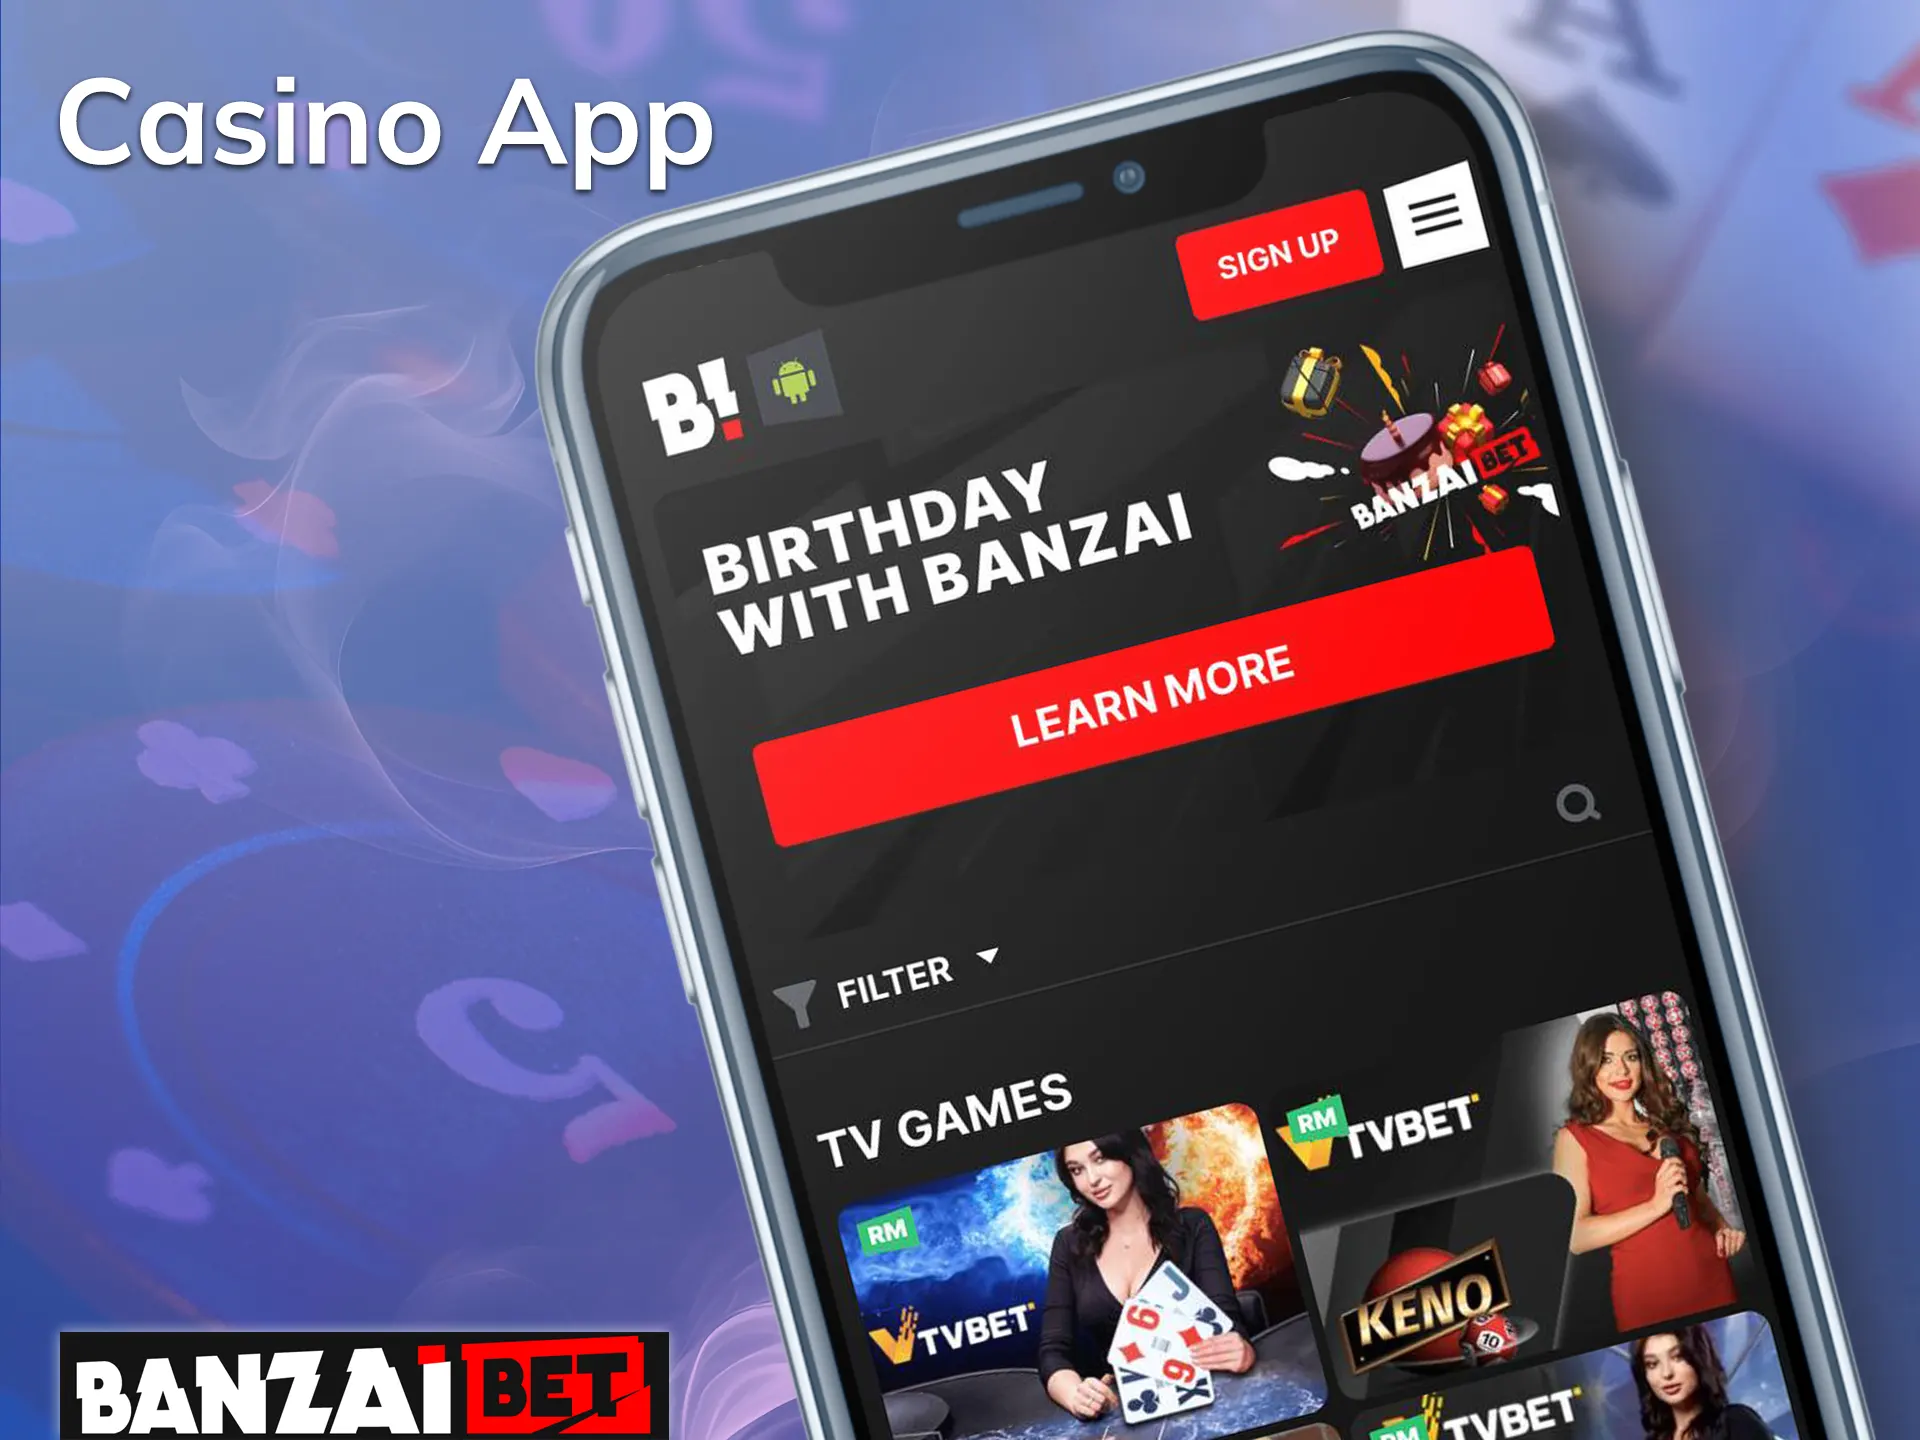 App Play at Banzai Bet online casino using your smartphone.